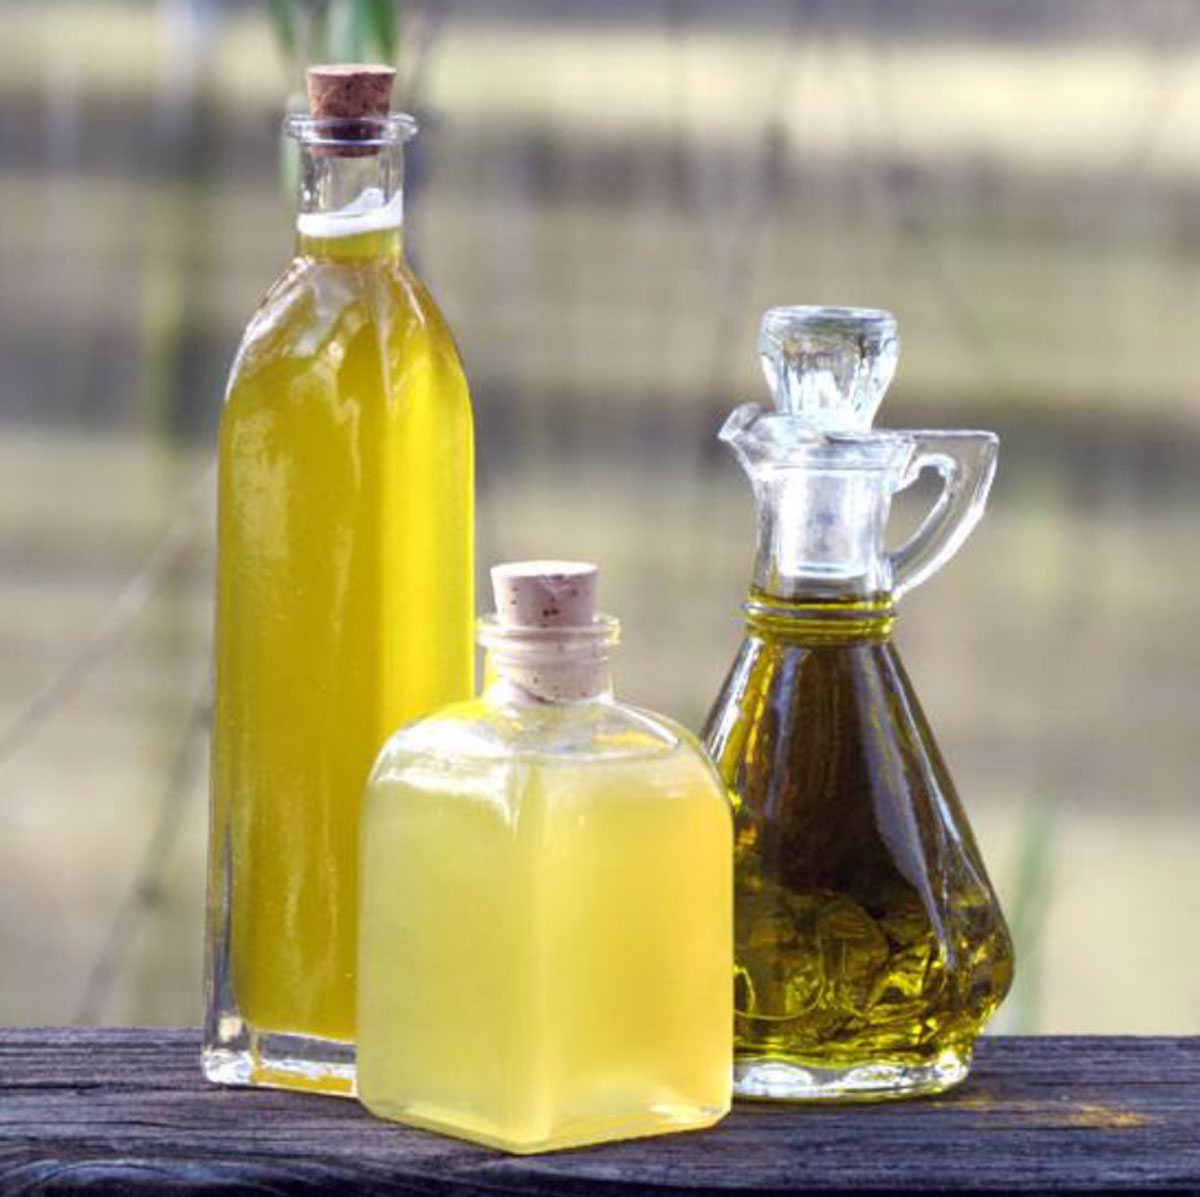 Feed Your Skin - Oil for Moisturizing